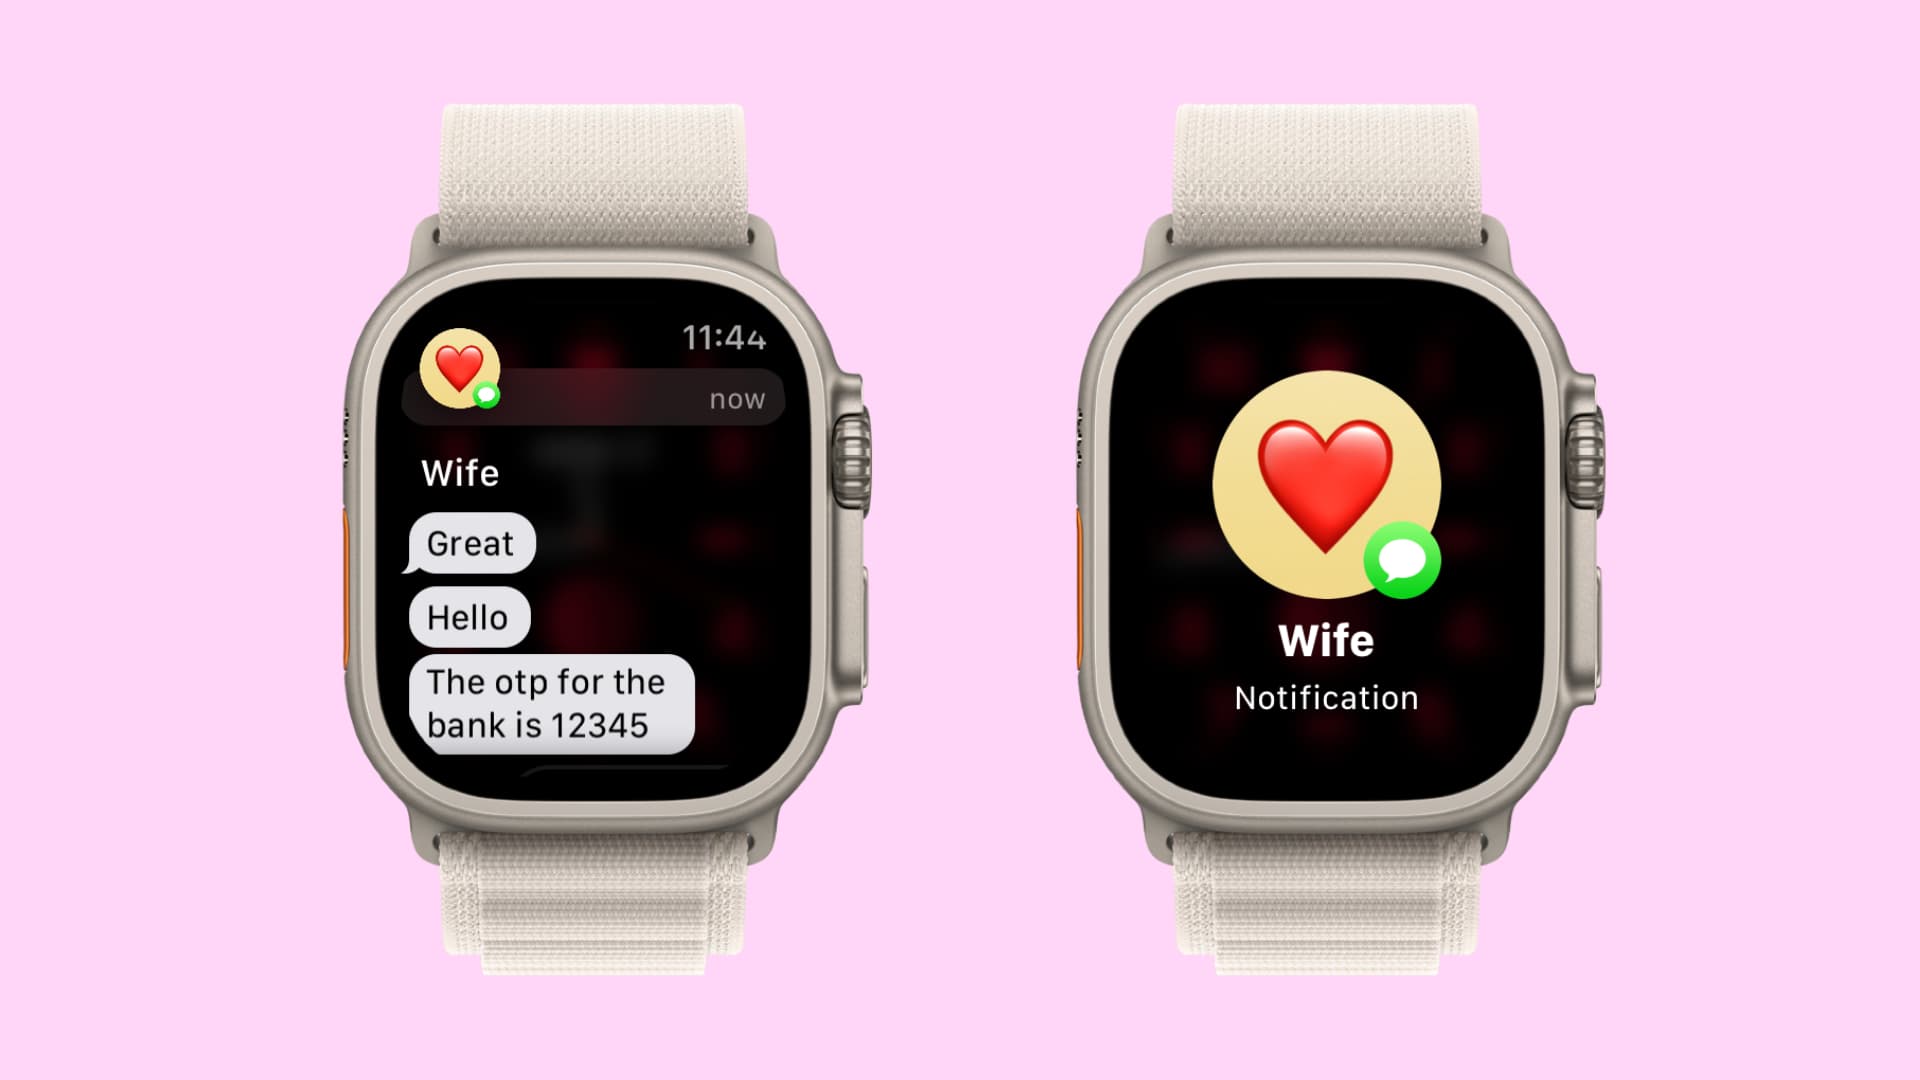 Can't dictate or type messages on my watch - Apple Community